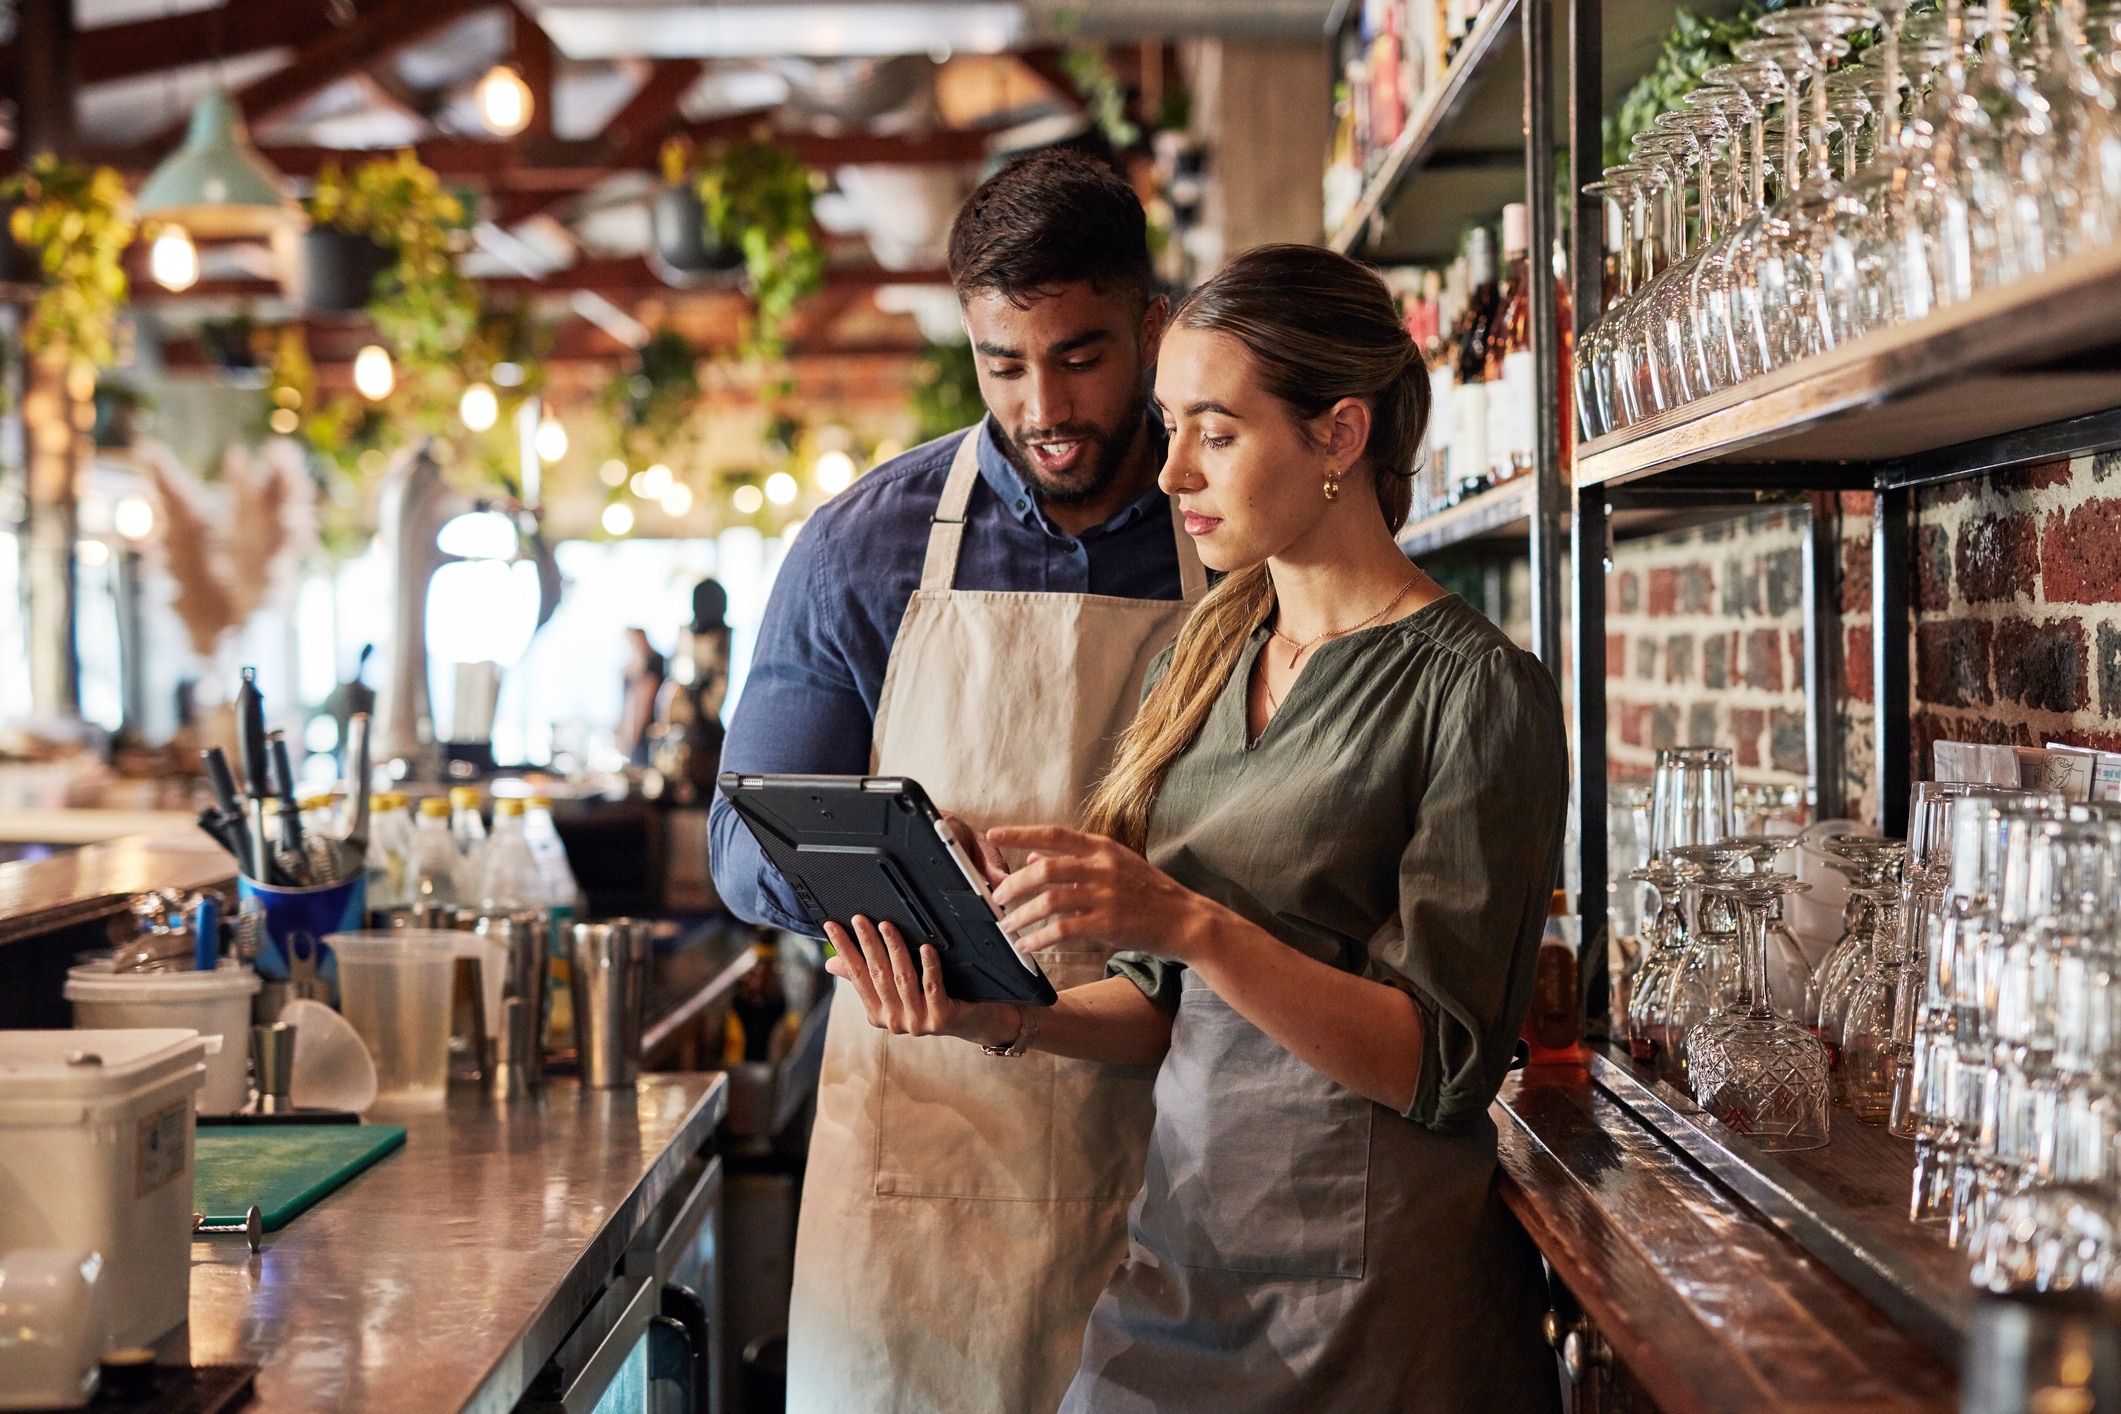 Employees review restaurant inventory management